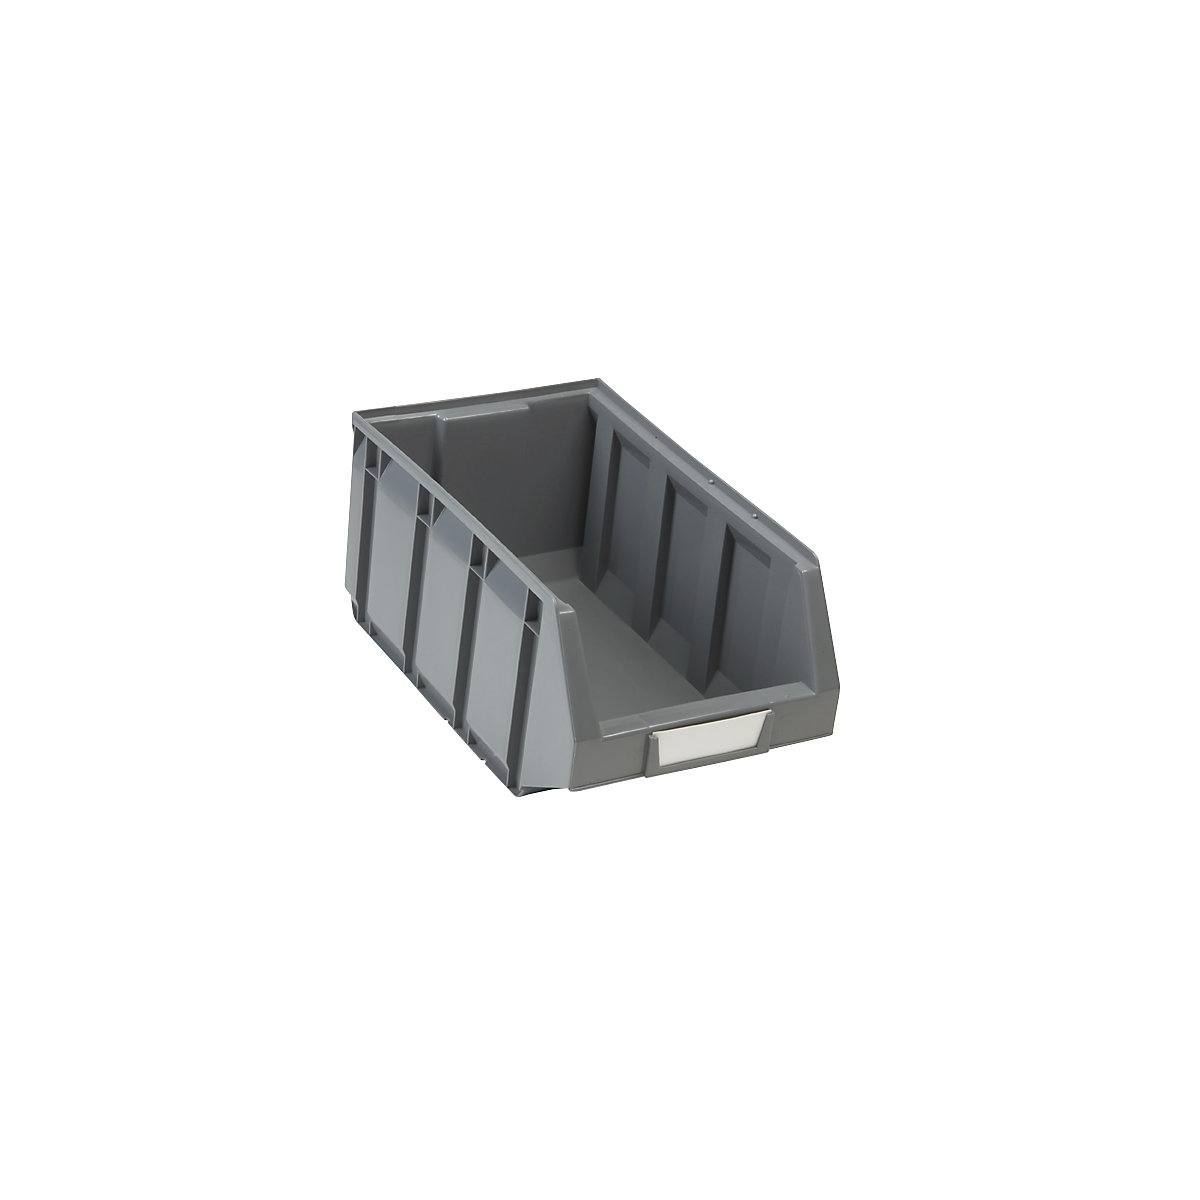 Open fronted storage bin made of polyethylene, LxWxH 345 x 205 x 164 mm, grey, pack of 24-10